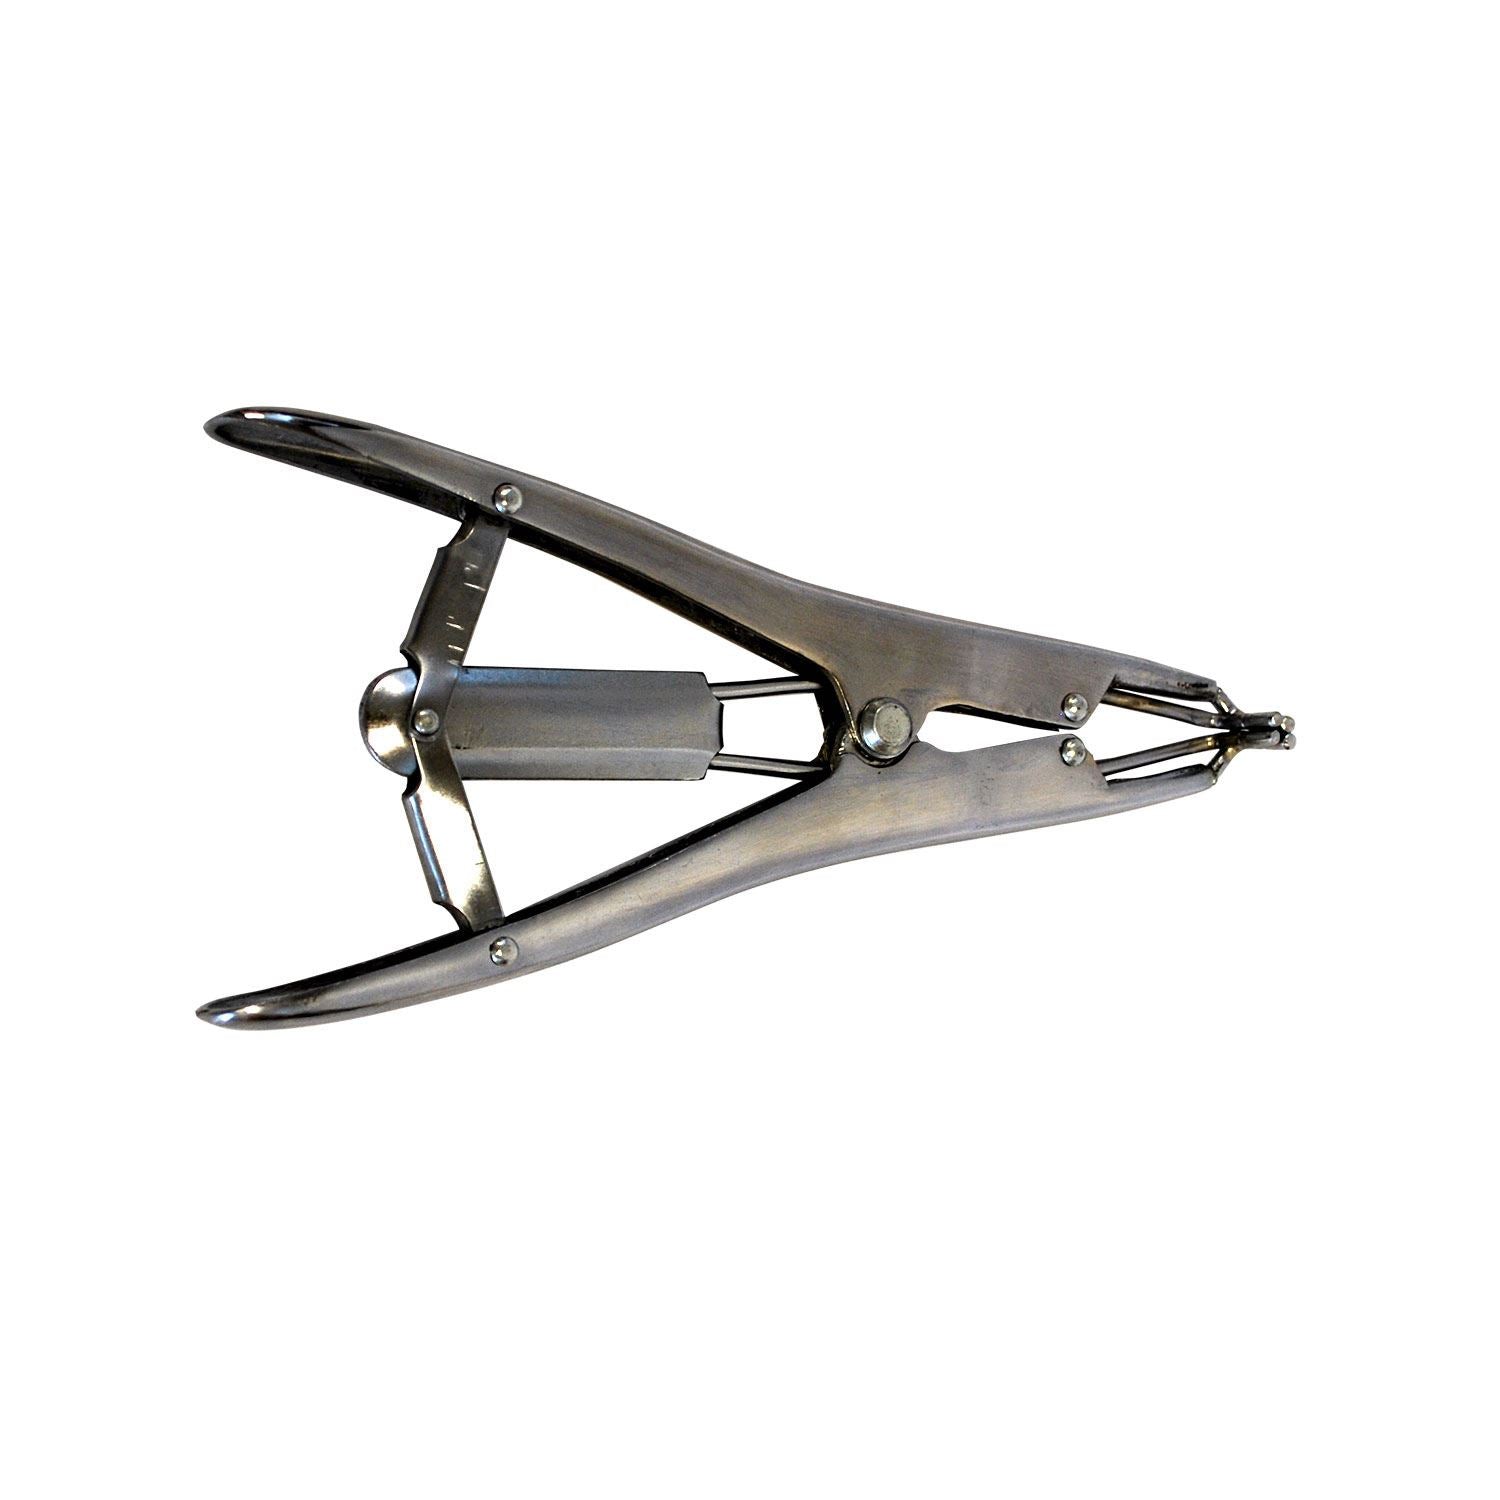 Nettex Elastration Pliers - Just Horse Riders